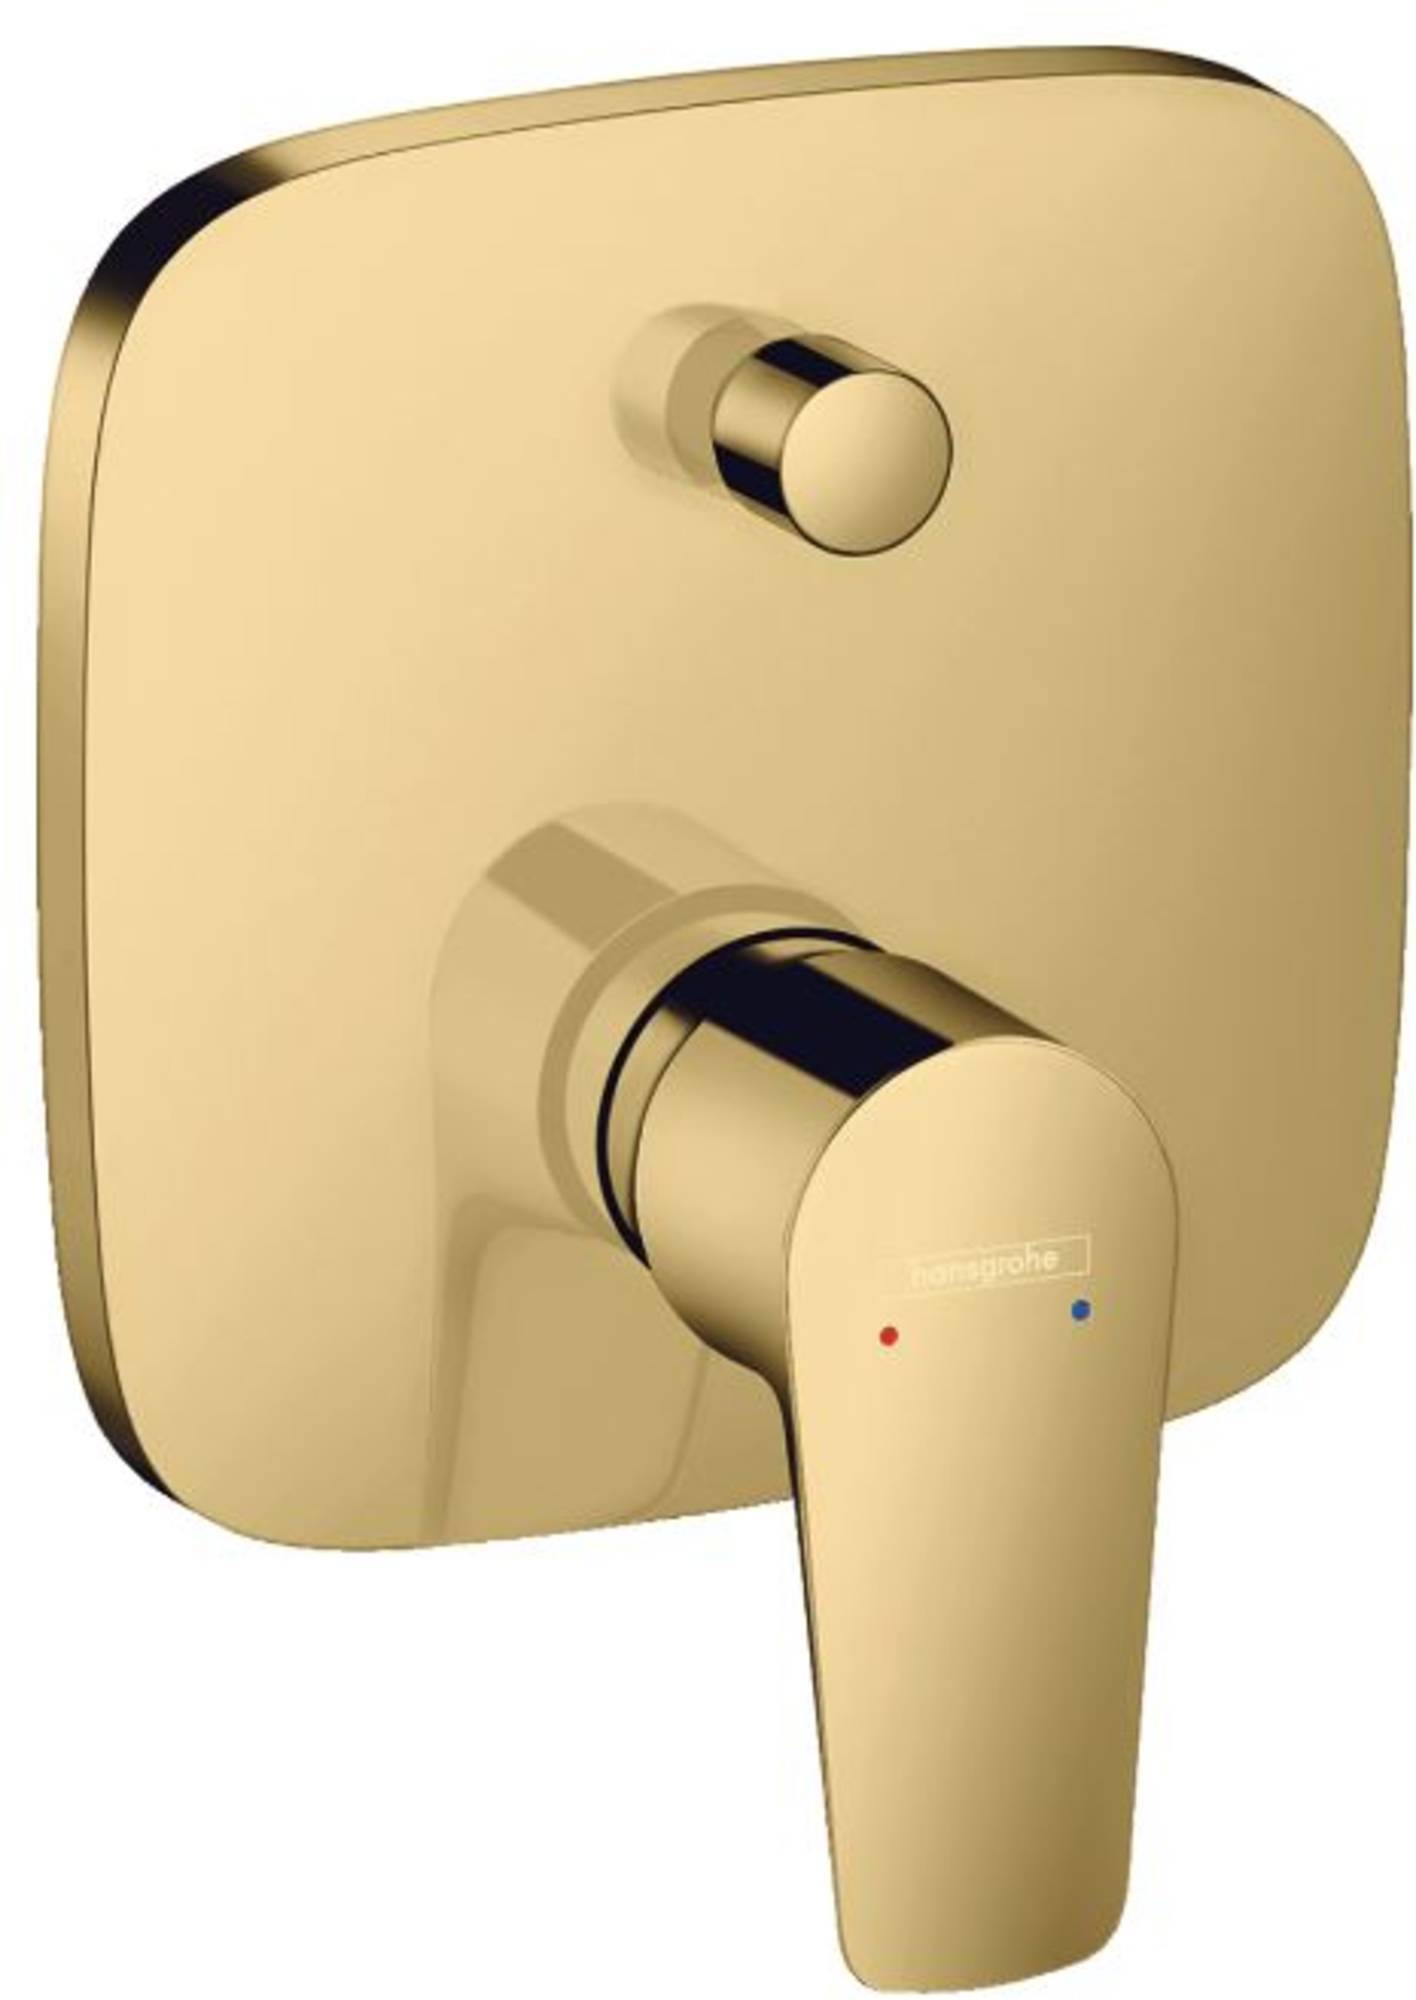 Hansgrohe Talis E Badthermostaat Afbouwdeel Polished Gold Optic